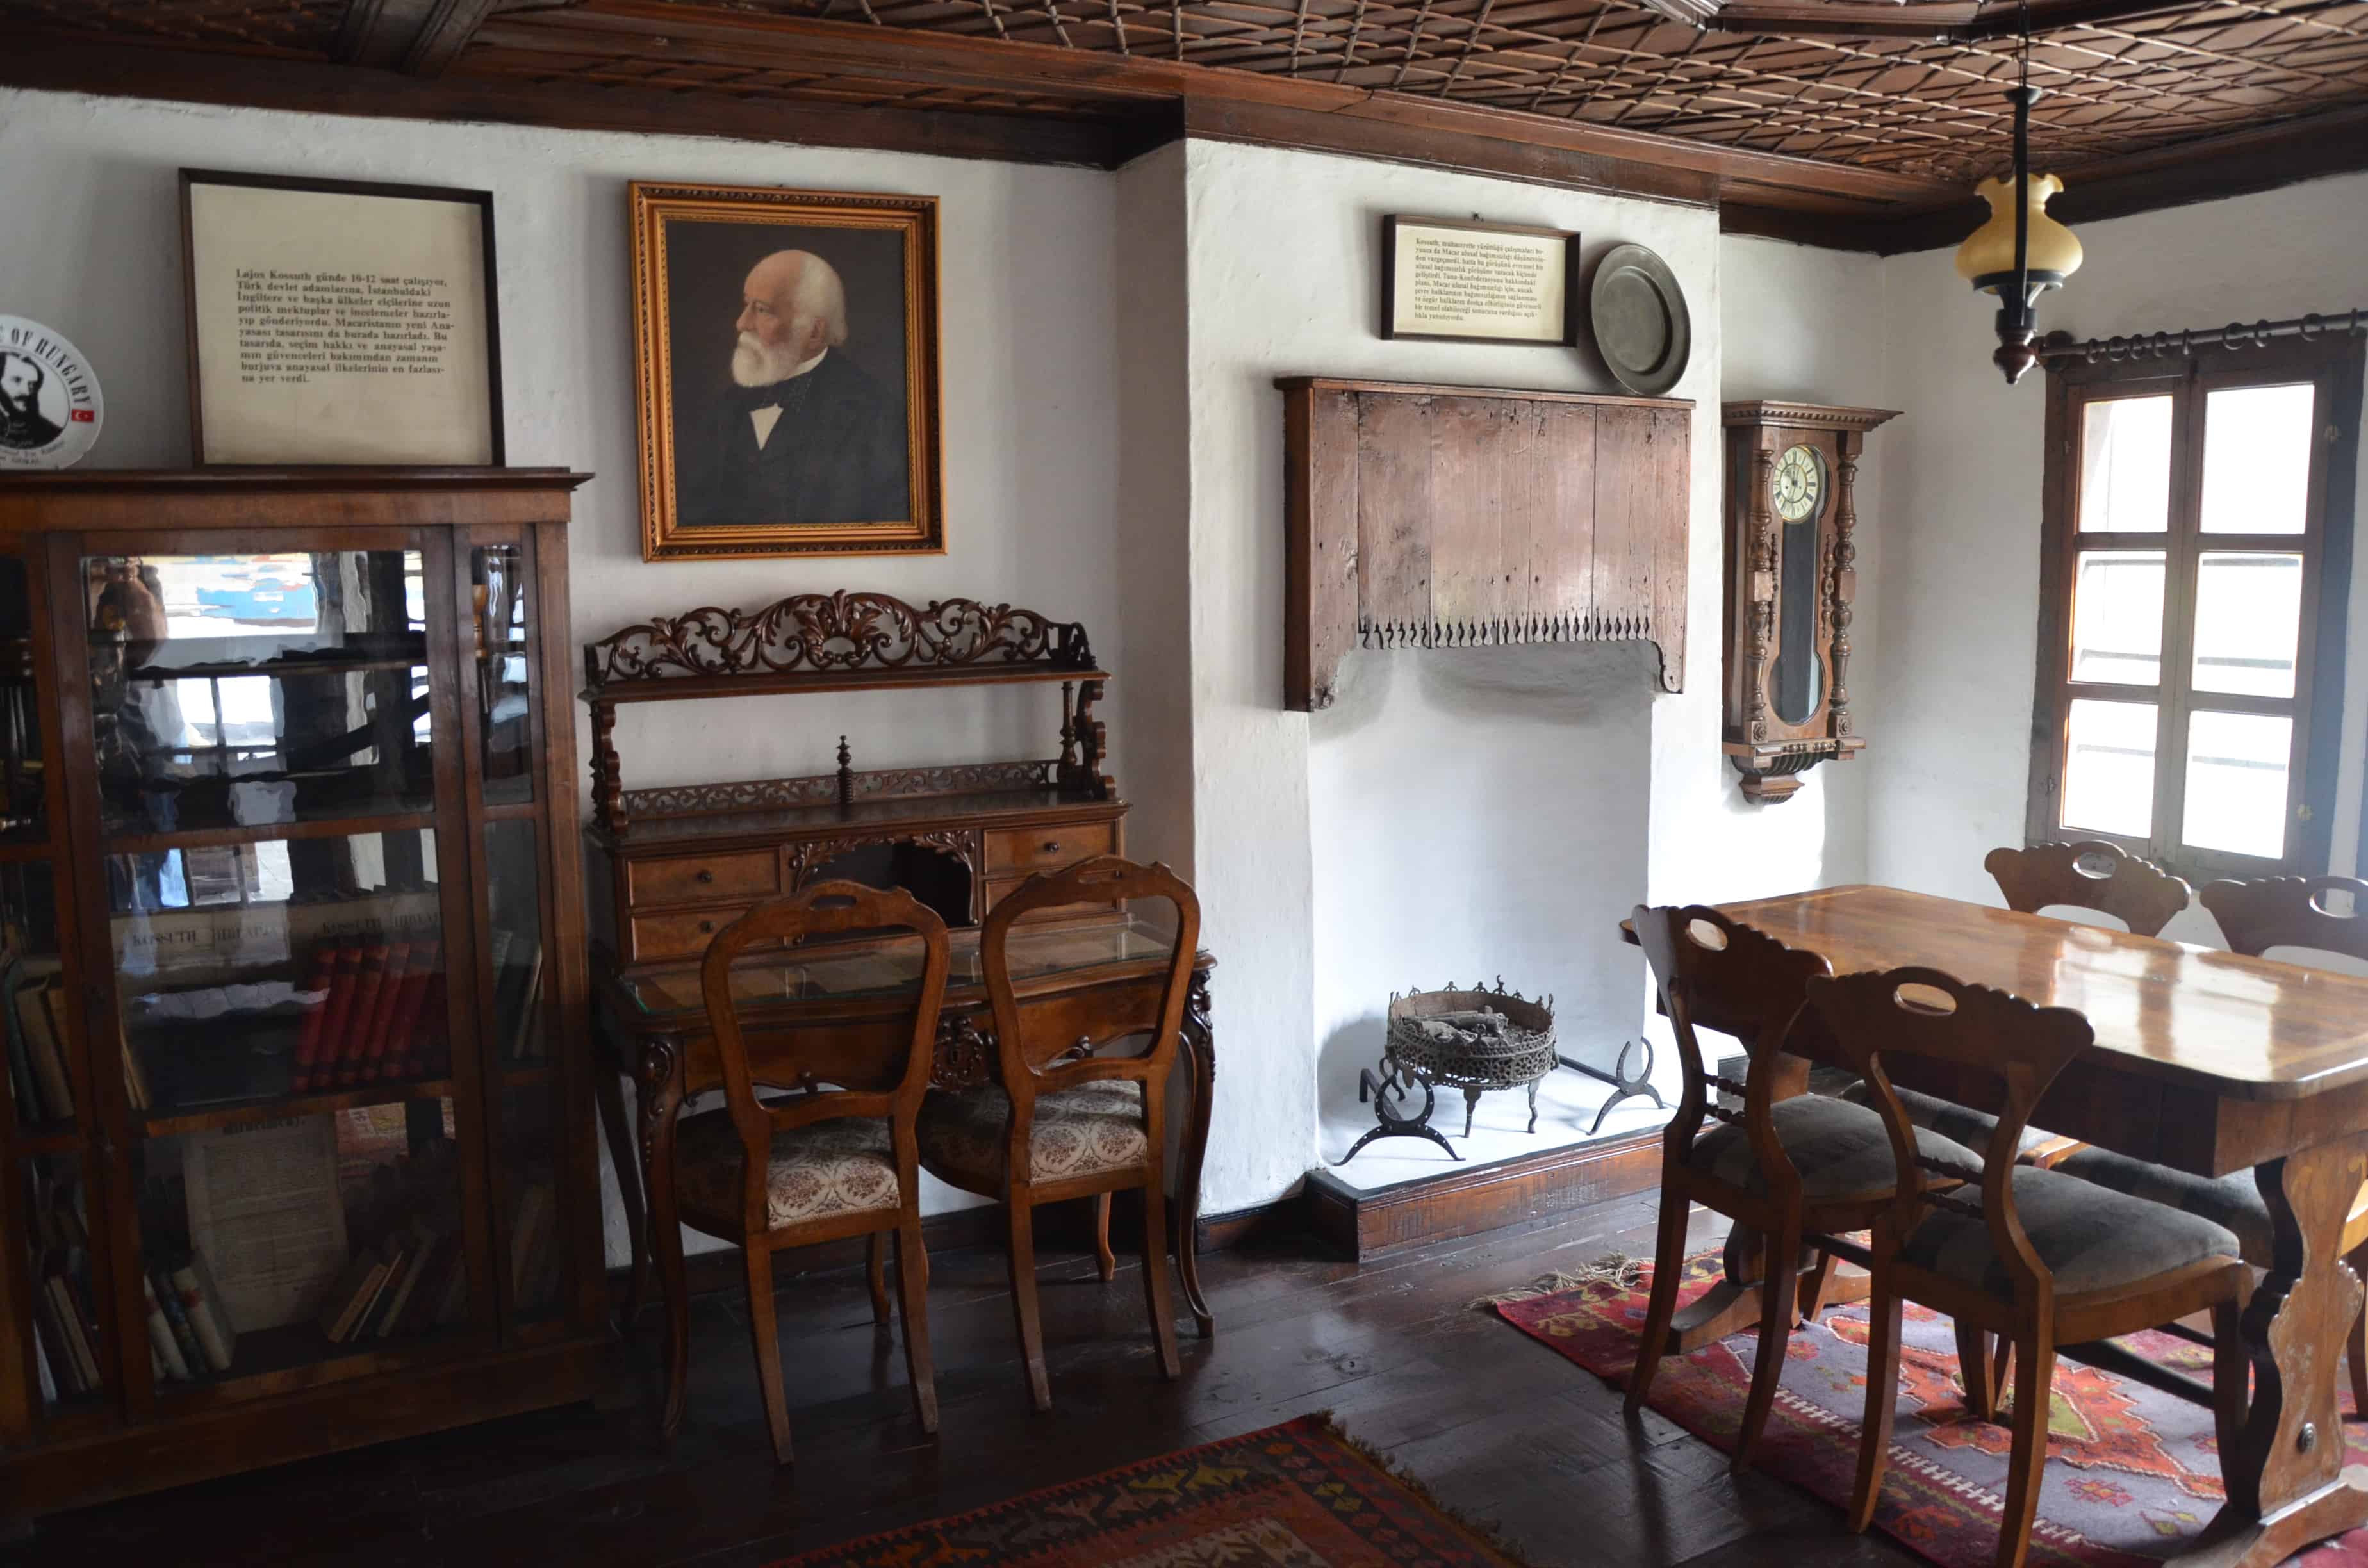 Office at the Lajos Kossuth House